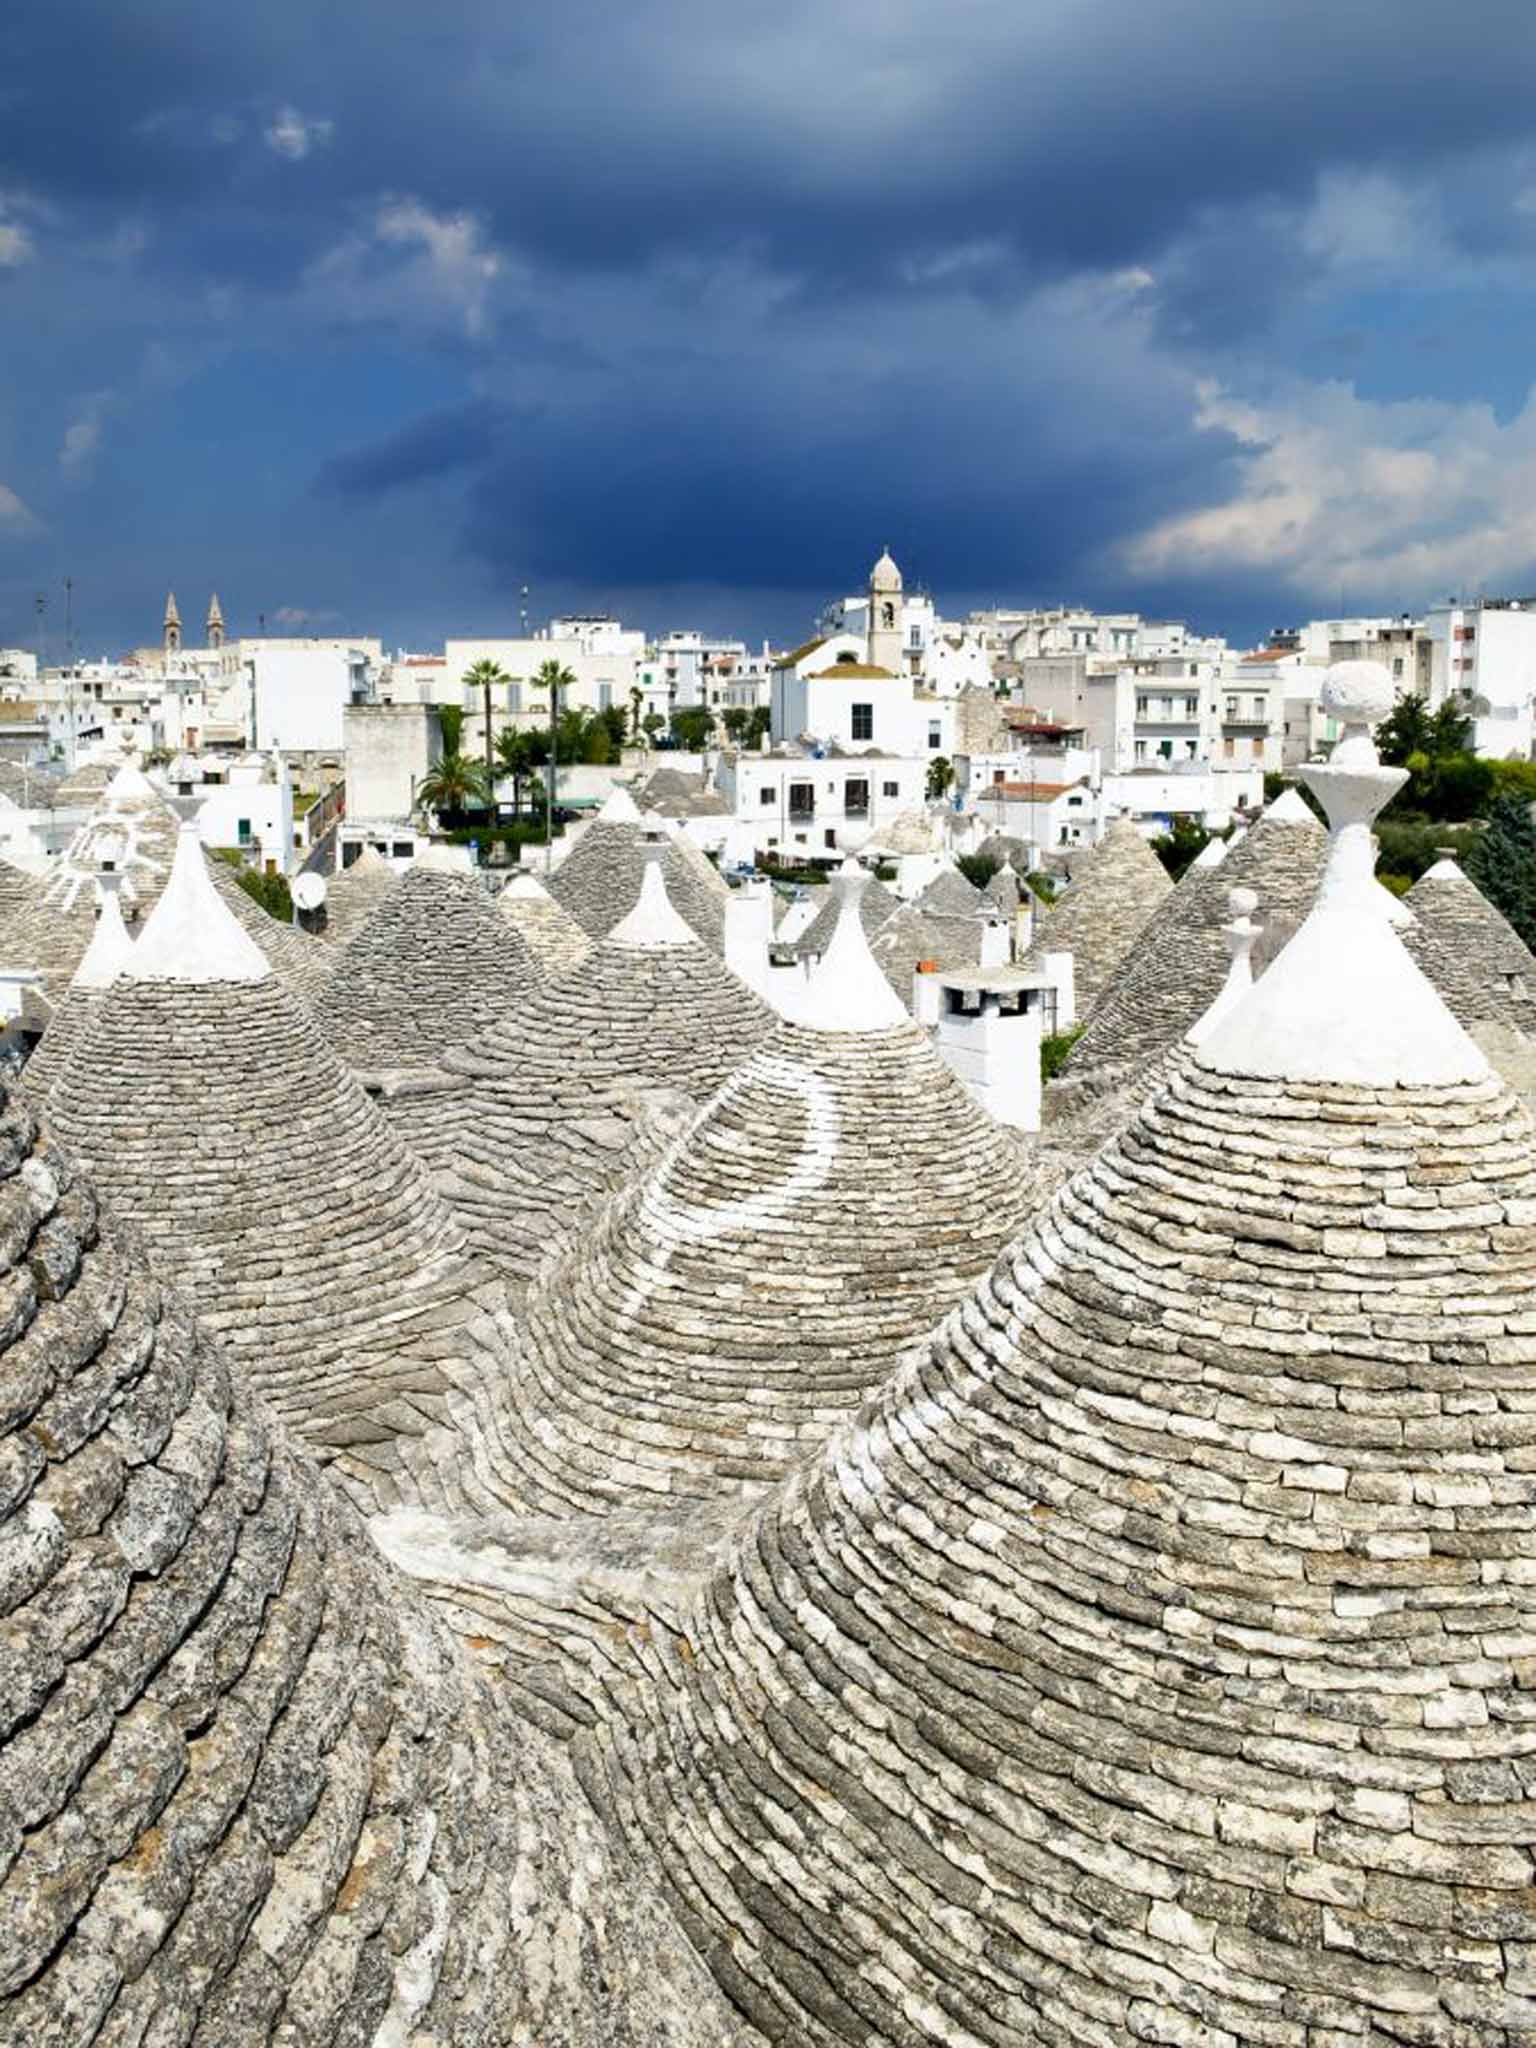 Trulli special: The traditional Italian dry stone huts with conical roofs are now part of the UN's expanding brief